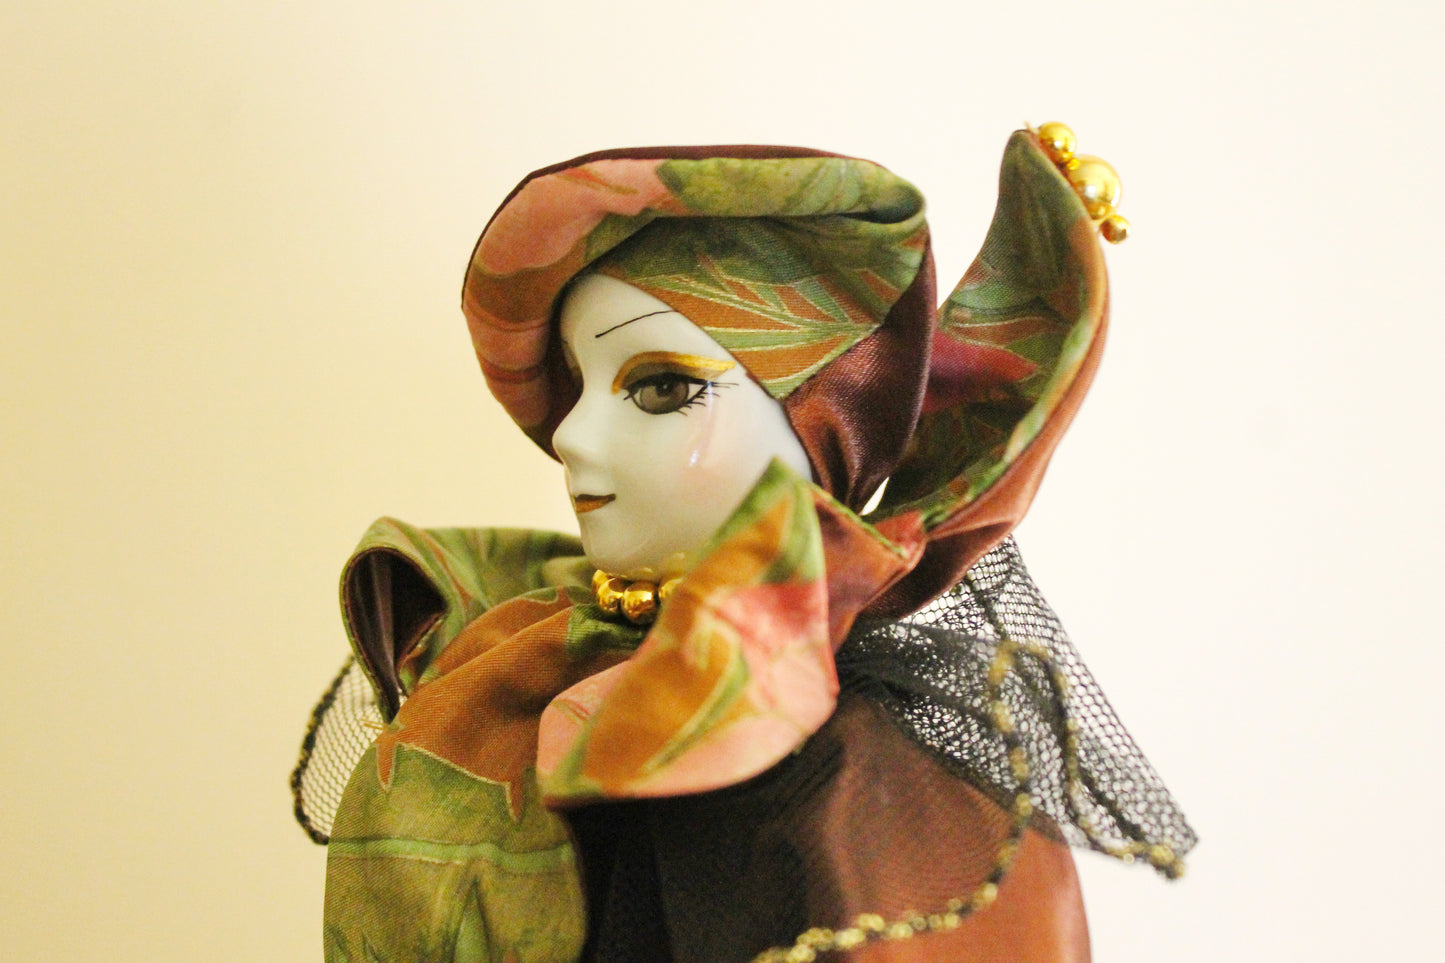 Vintage porcelain Venetian beautiful doll - Harlequin - 15.7 inches- collectible doll - porcelain doll - decor doll - 1980s